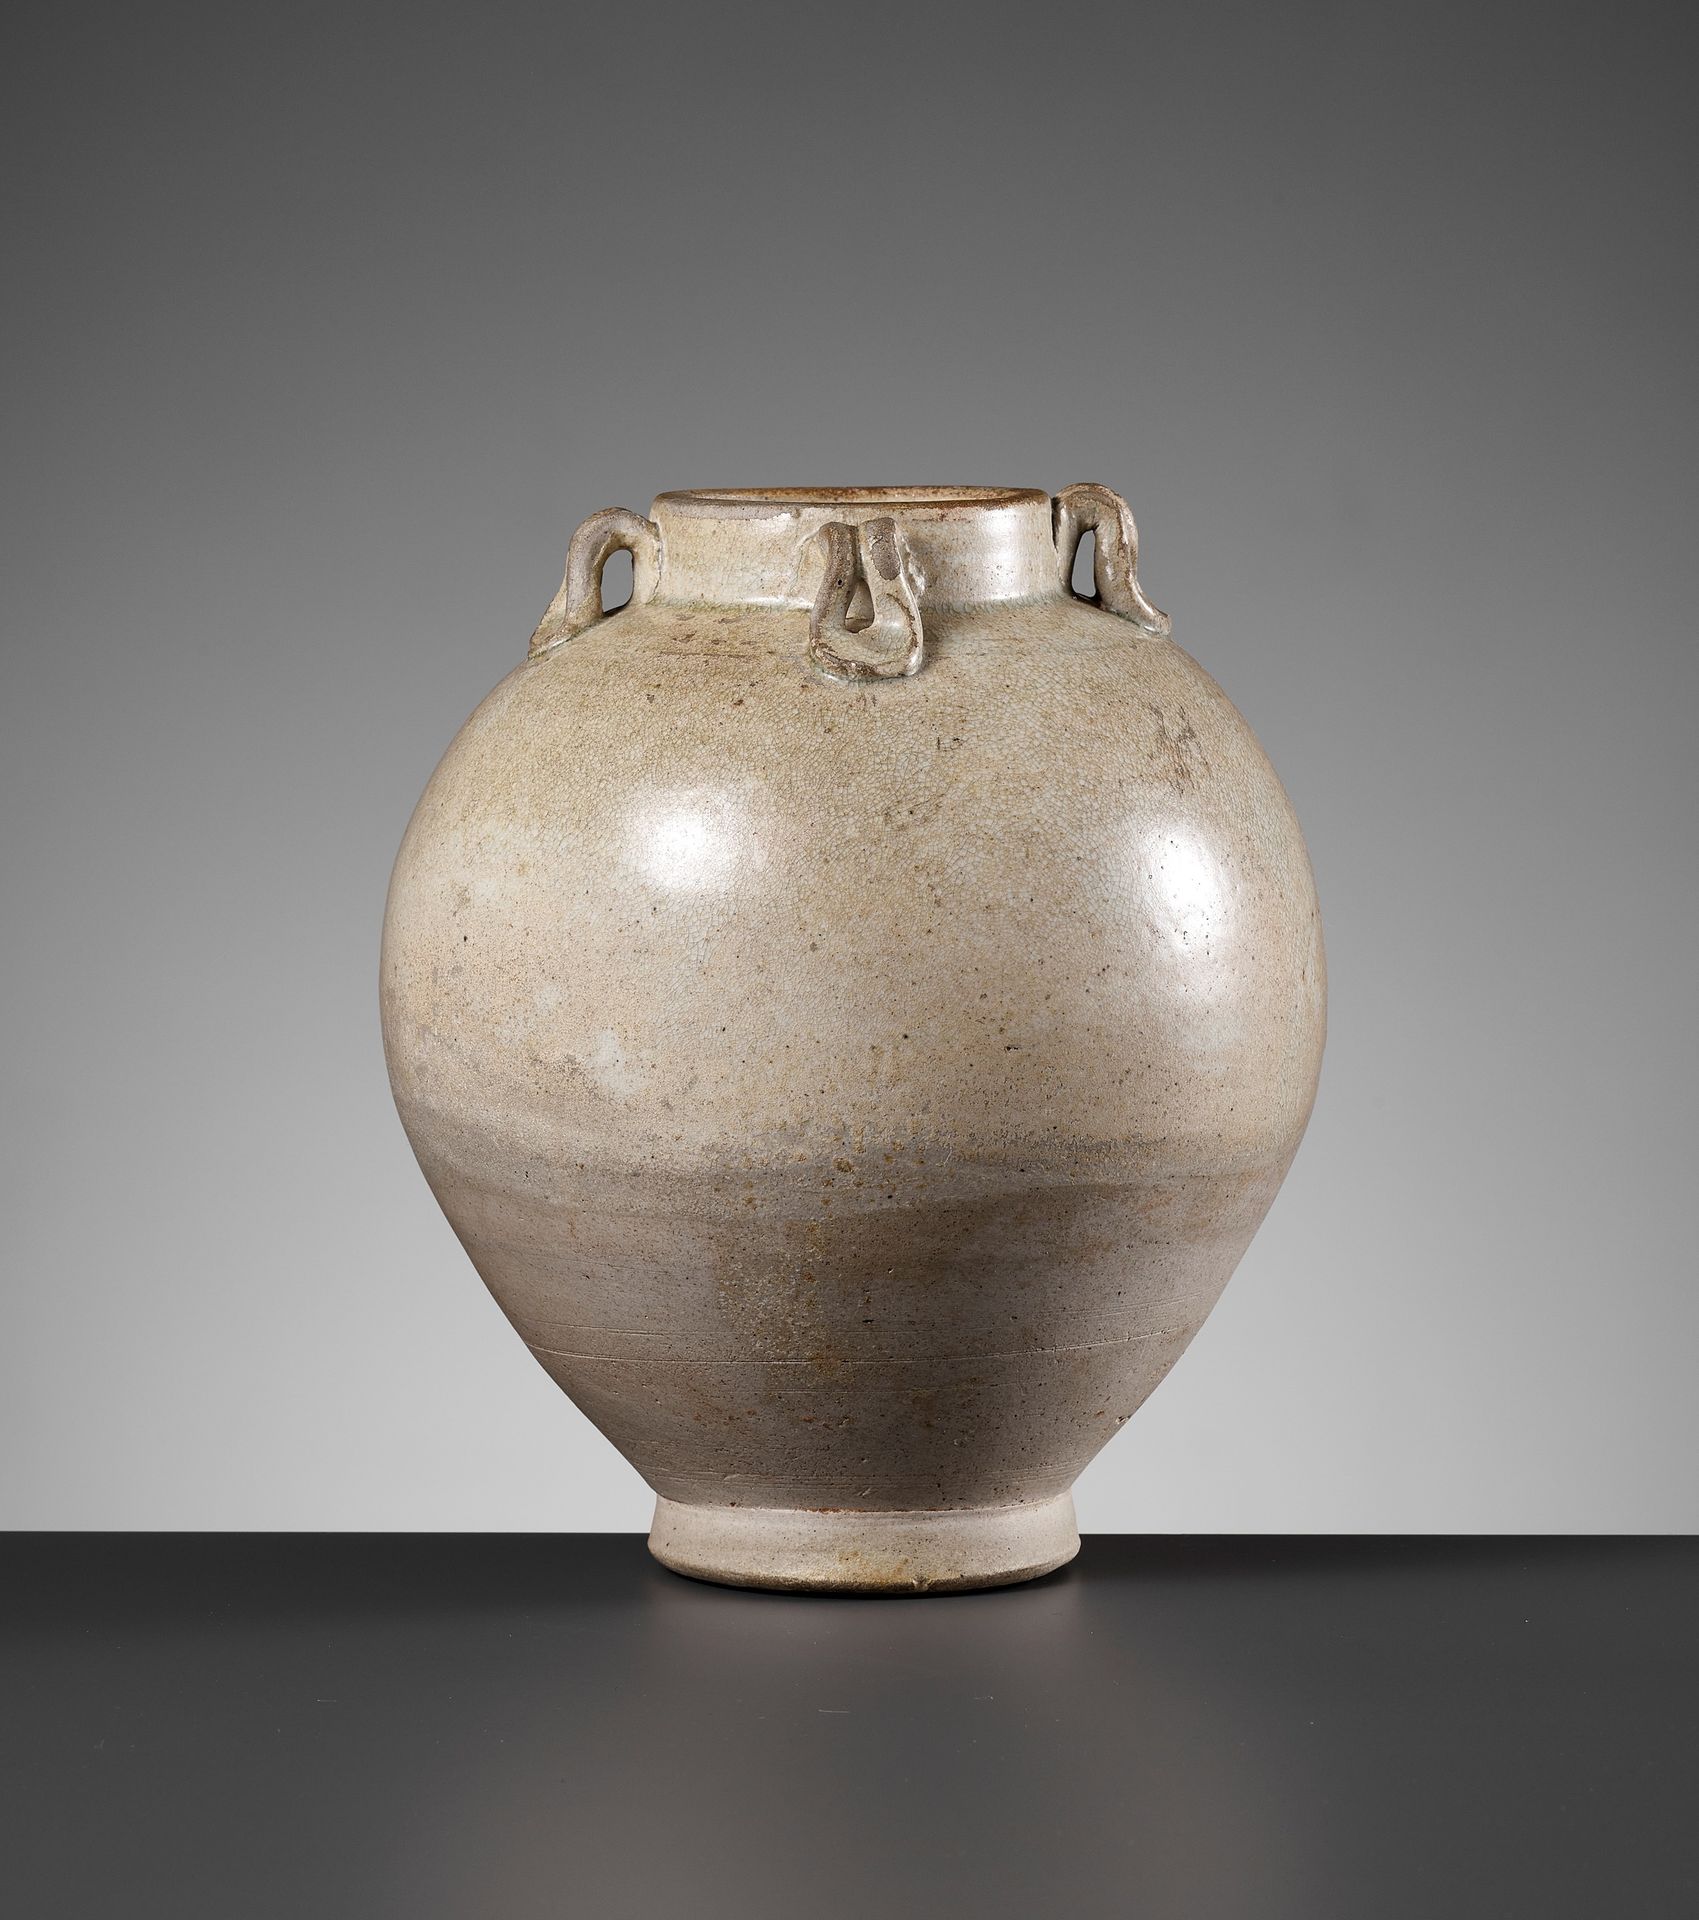 A CELADON-GLAZED JAR, SUI TO TANG DYNASTY KELADONGLASGEFÄSS, SUI TO TANG DYNASTY&hellip;